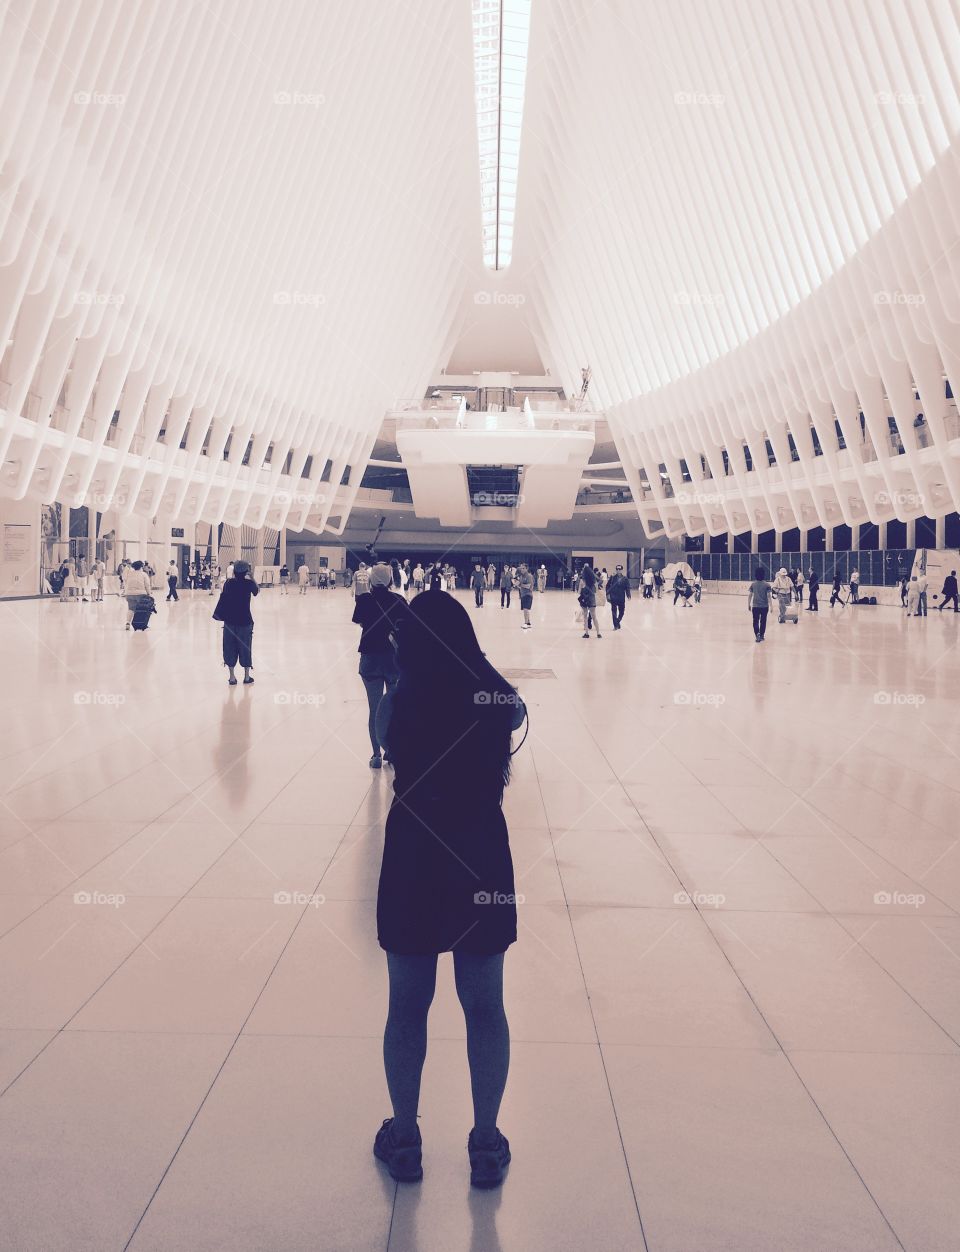 Photographing the Oculus